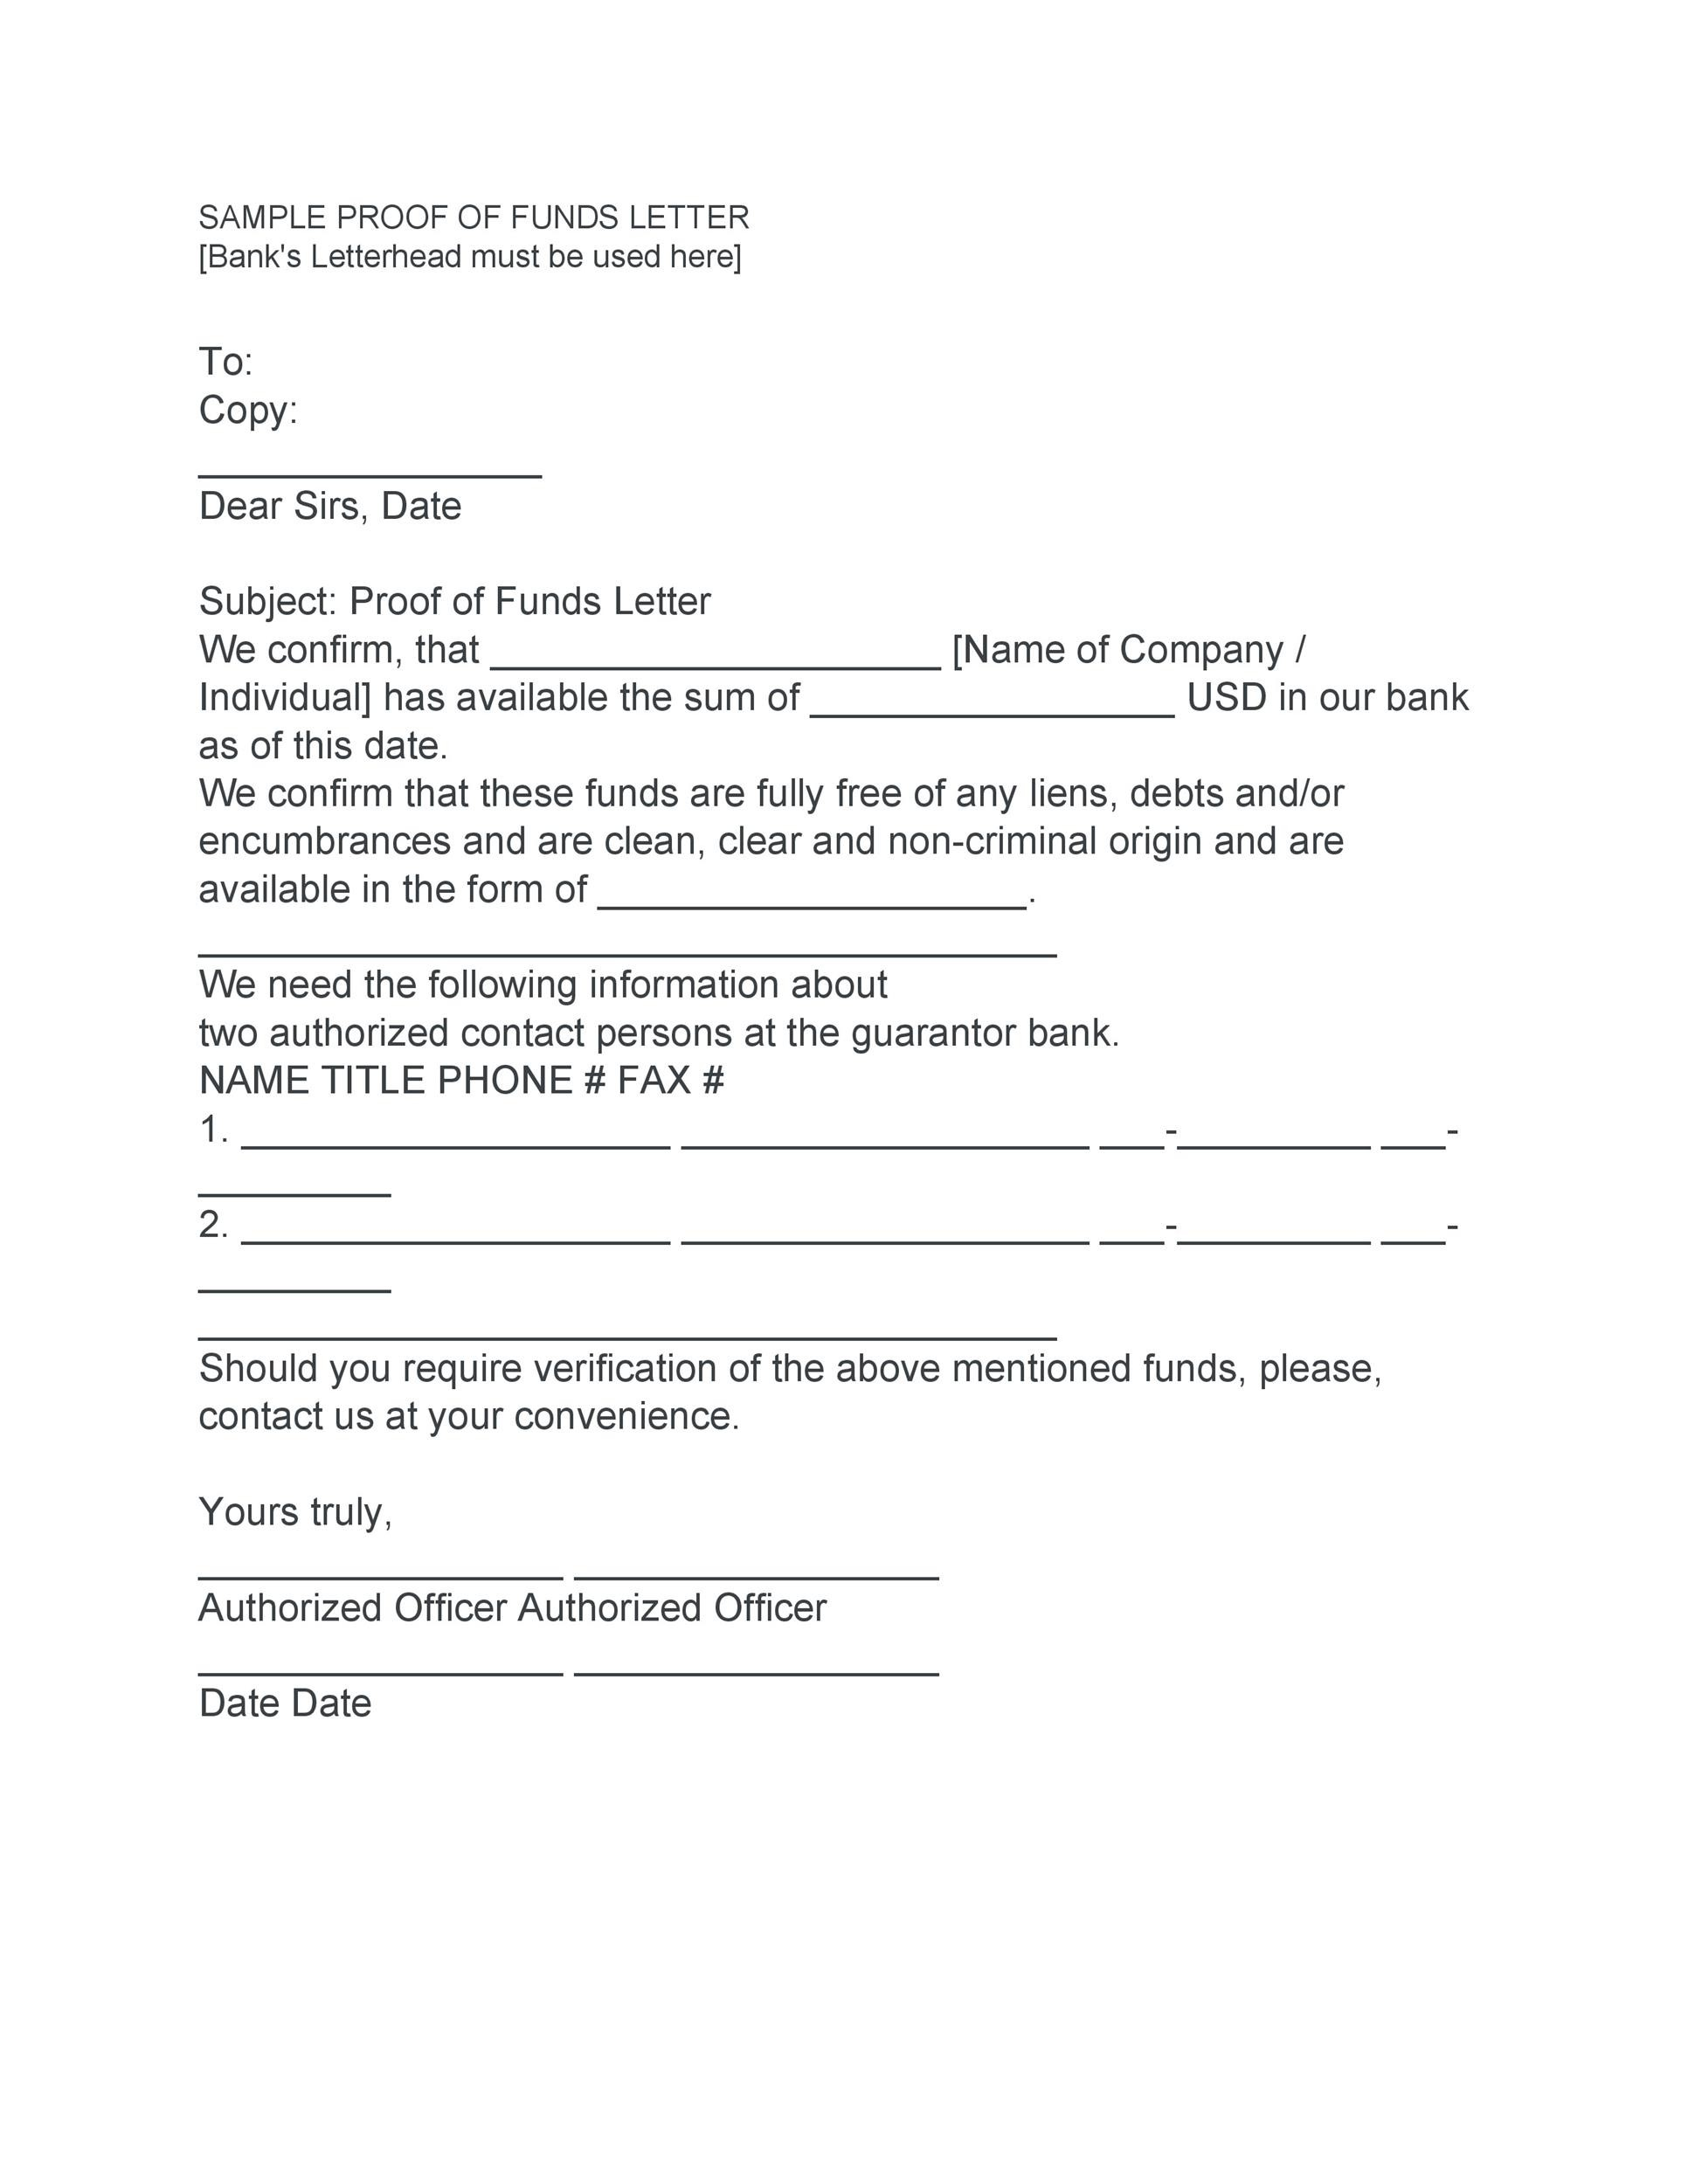 10 Best Proof of Funds Letter Templates ᐅ TemplateLab Regarding Proof Of Deposit Template For Proof Of Deposit Template